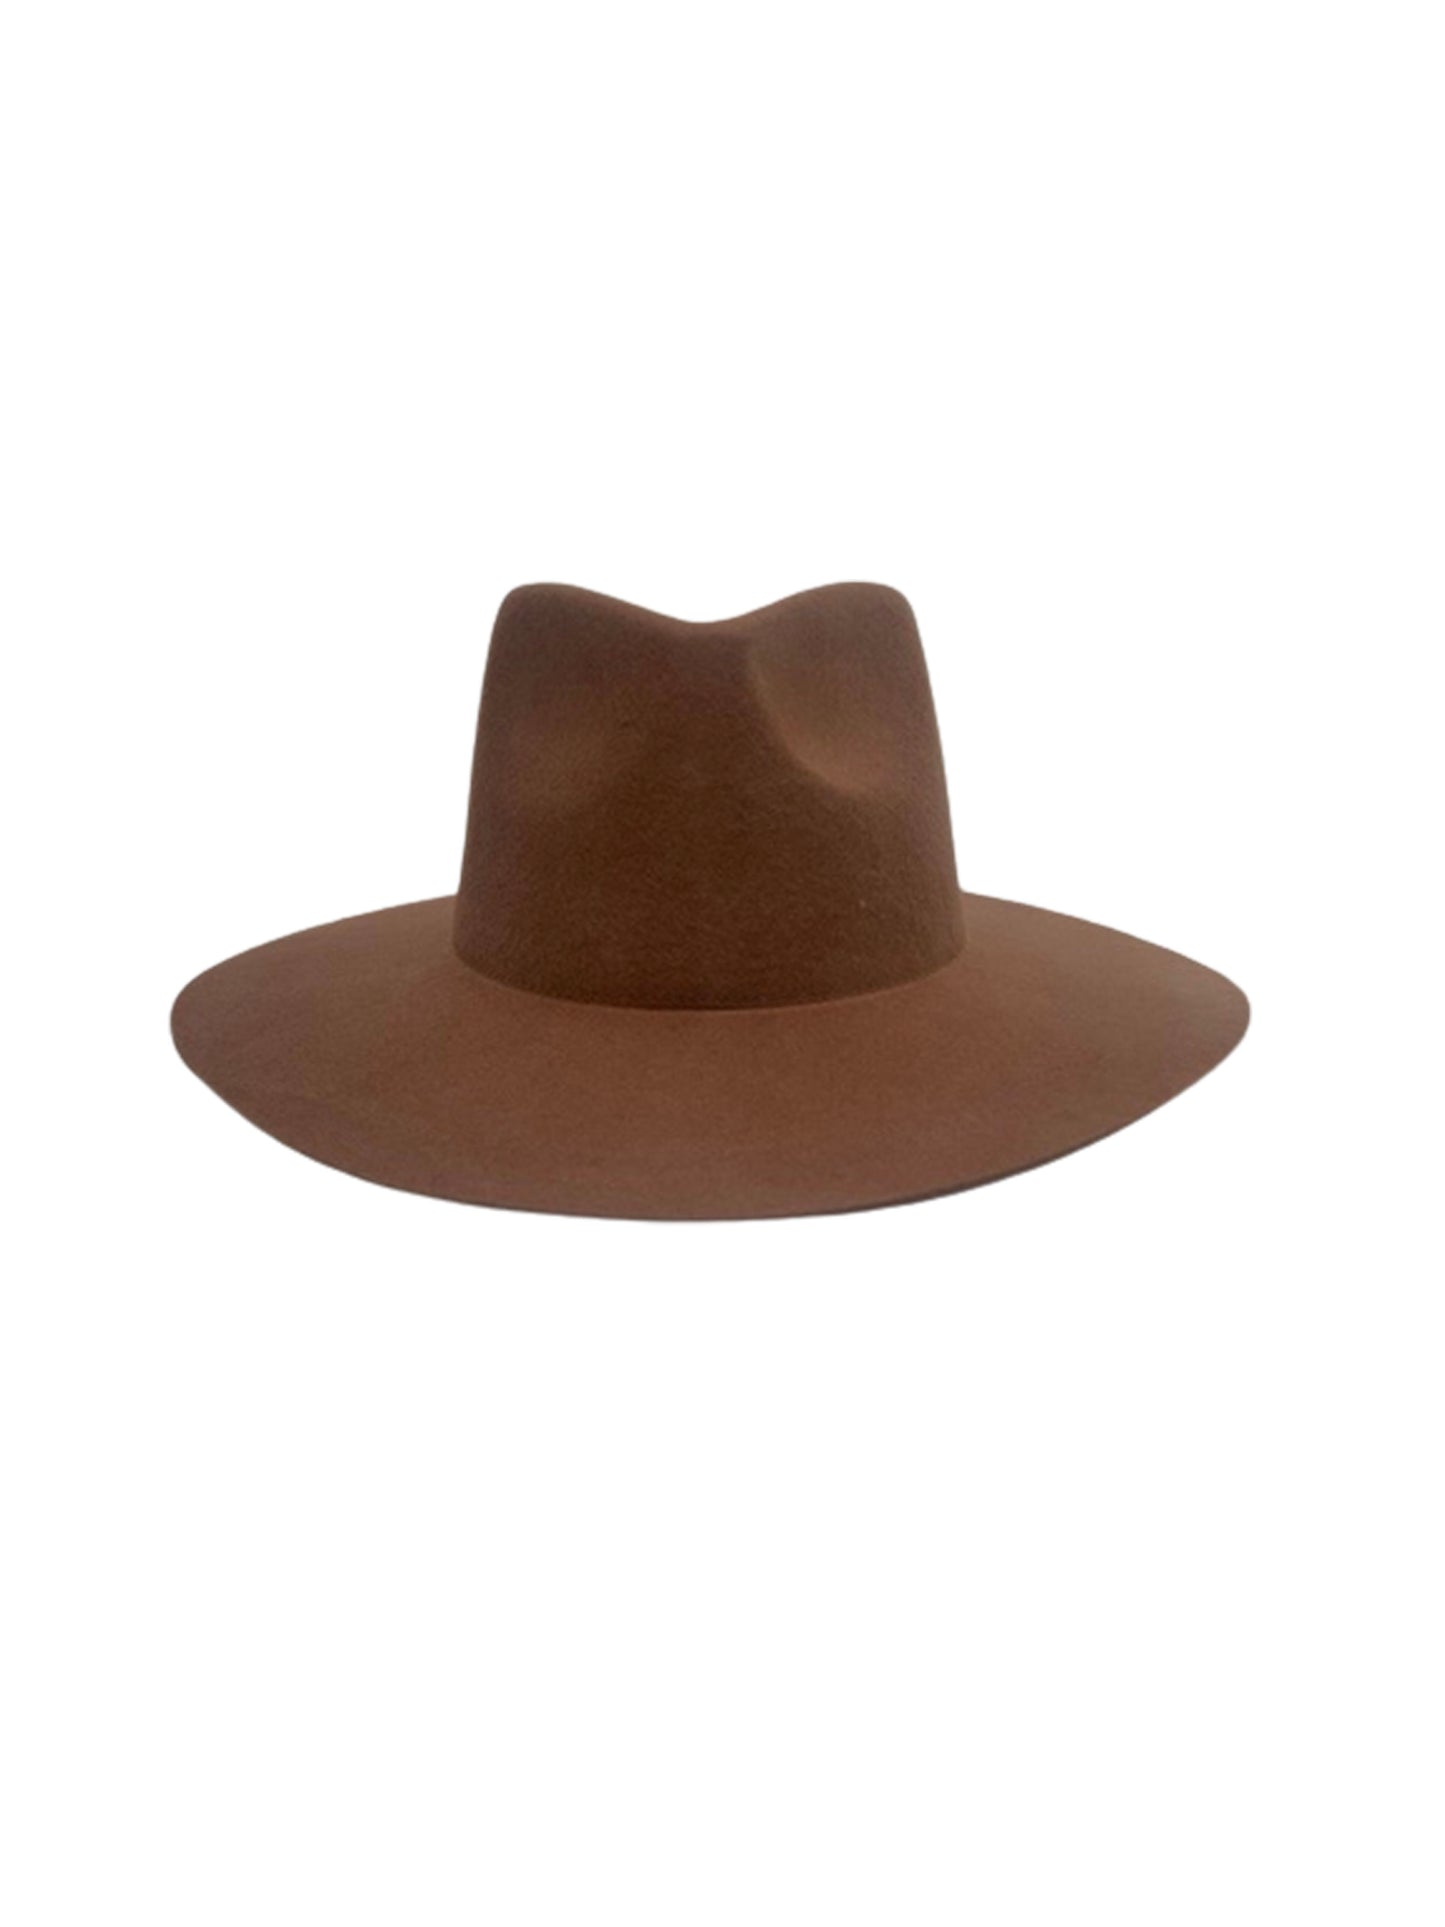 rancher hat chocolate front